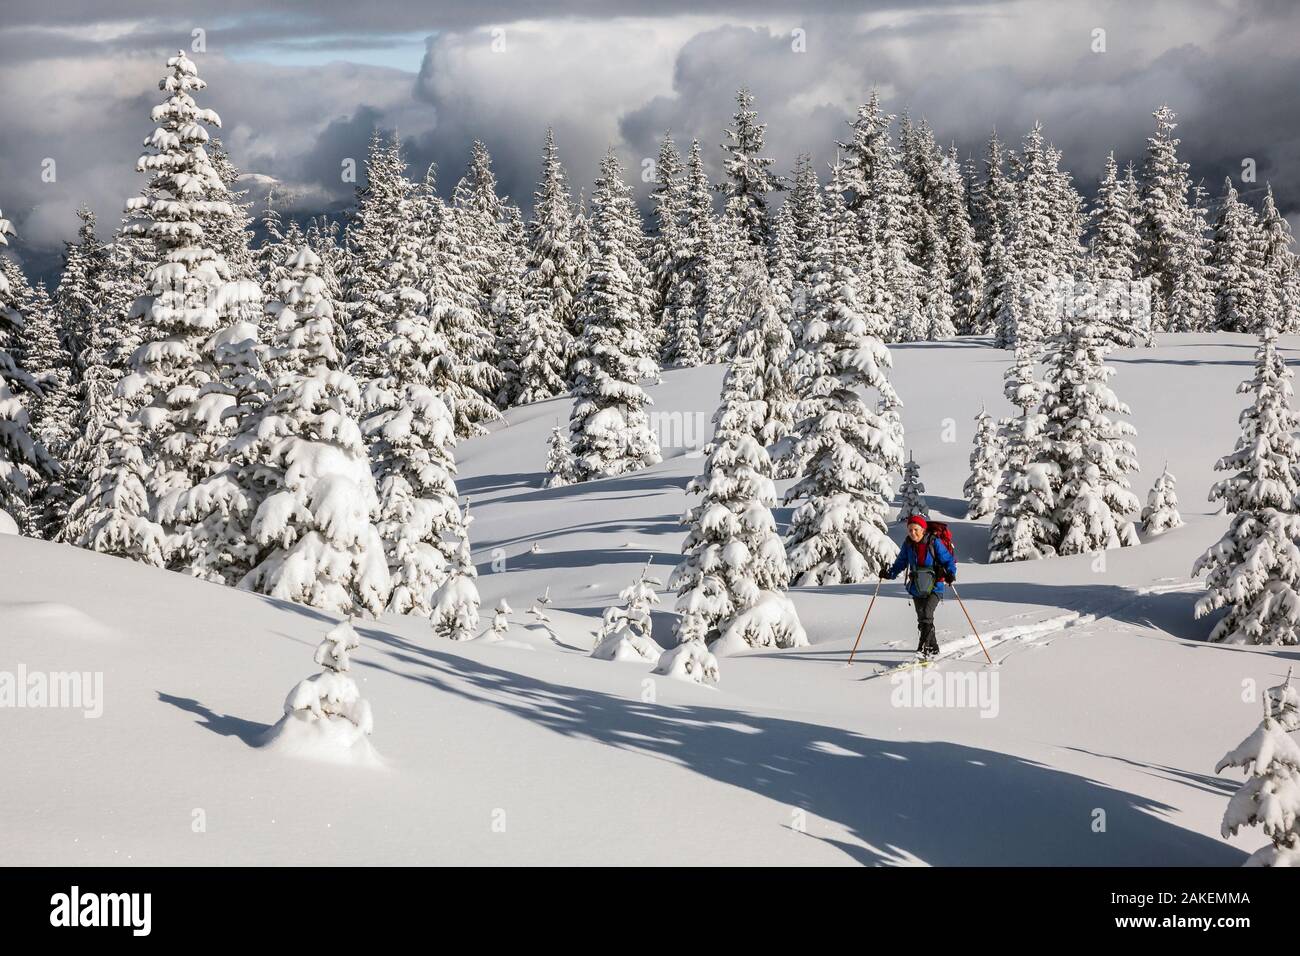 Woman cross-country skiing at the summit, Suntop Mountain,Baker-Snoqualmie National Forest, Washington, USA, February 2018. Stock Photo